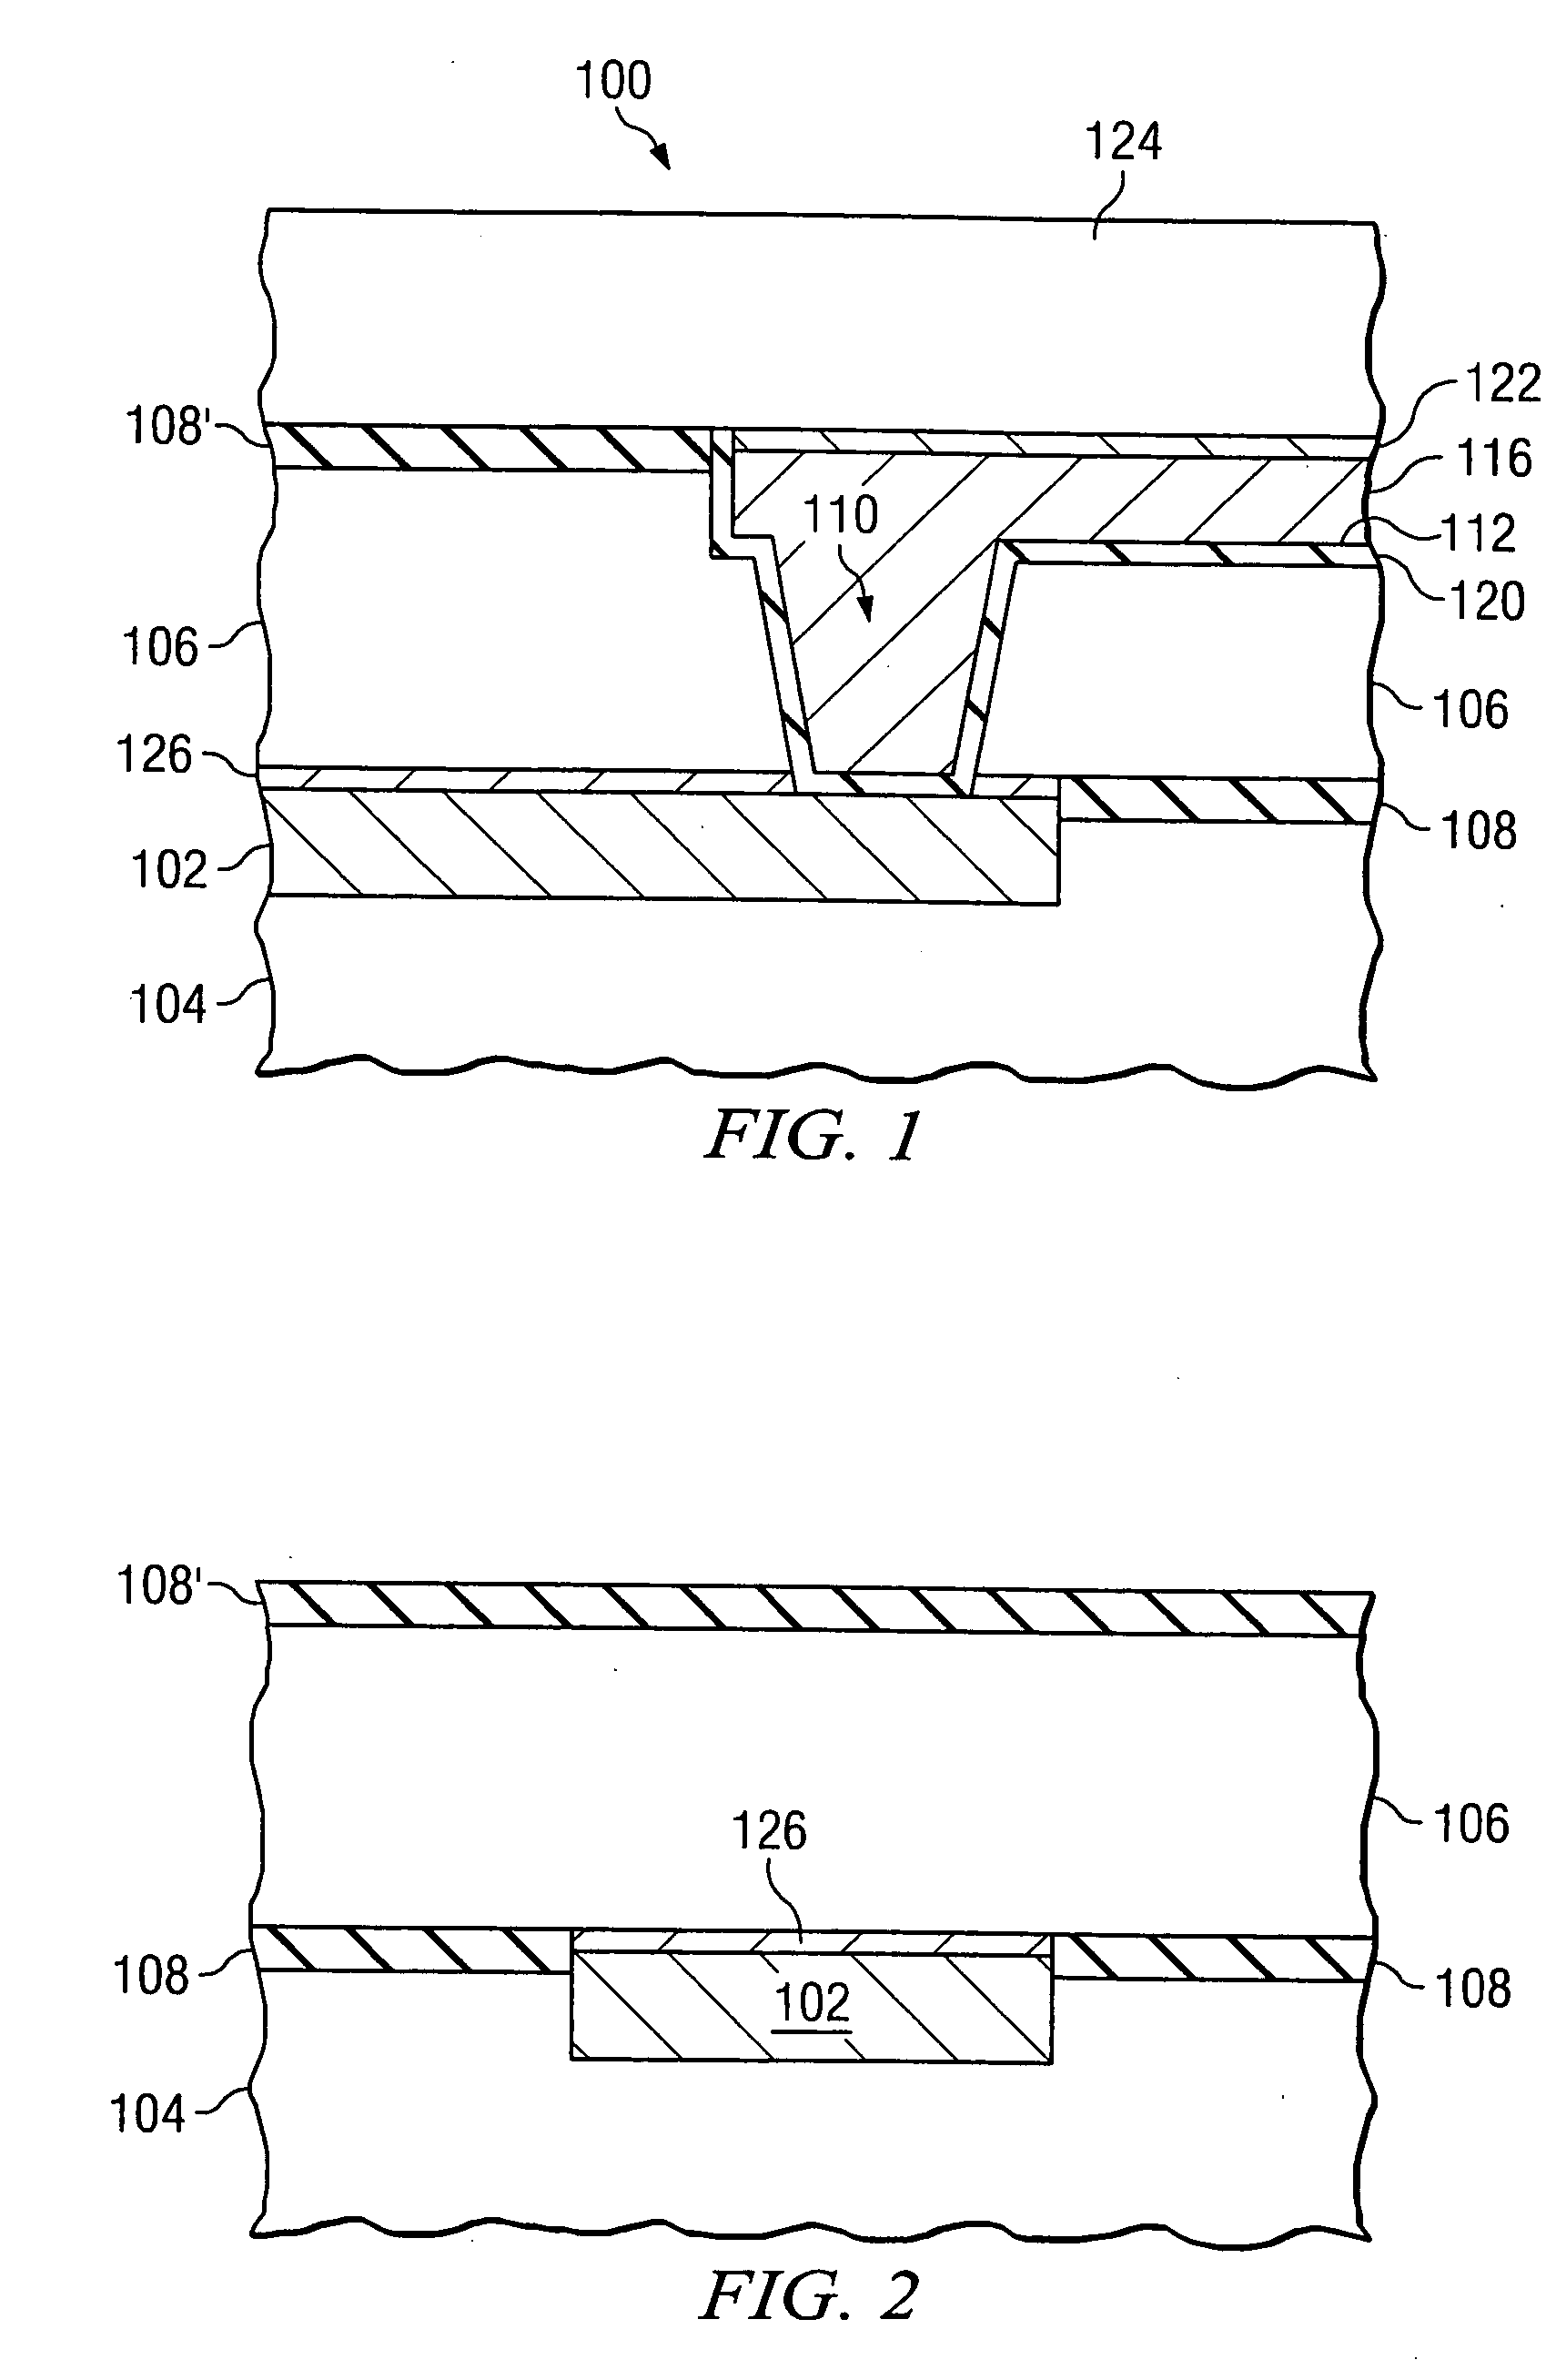 Method of making a semiconductor interconnect with a metal cap